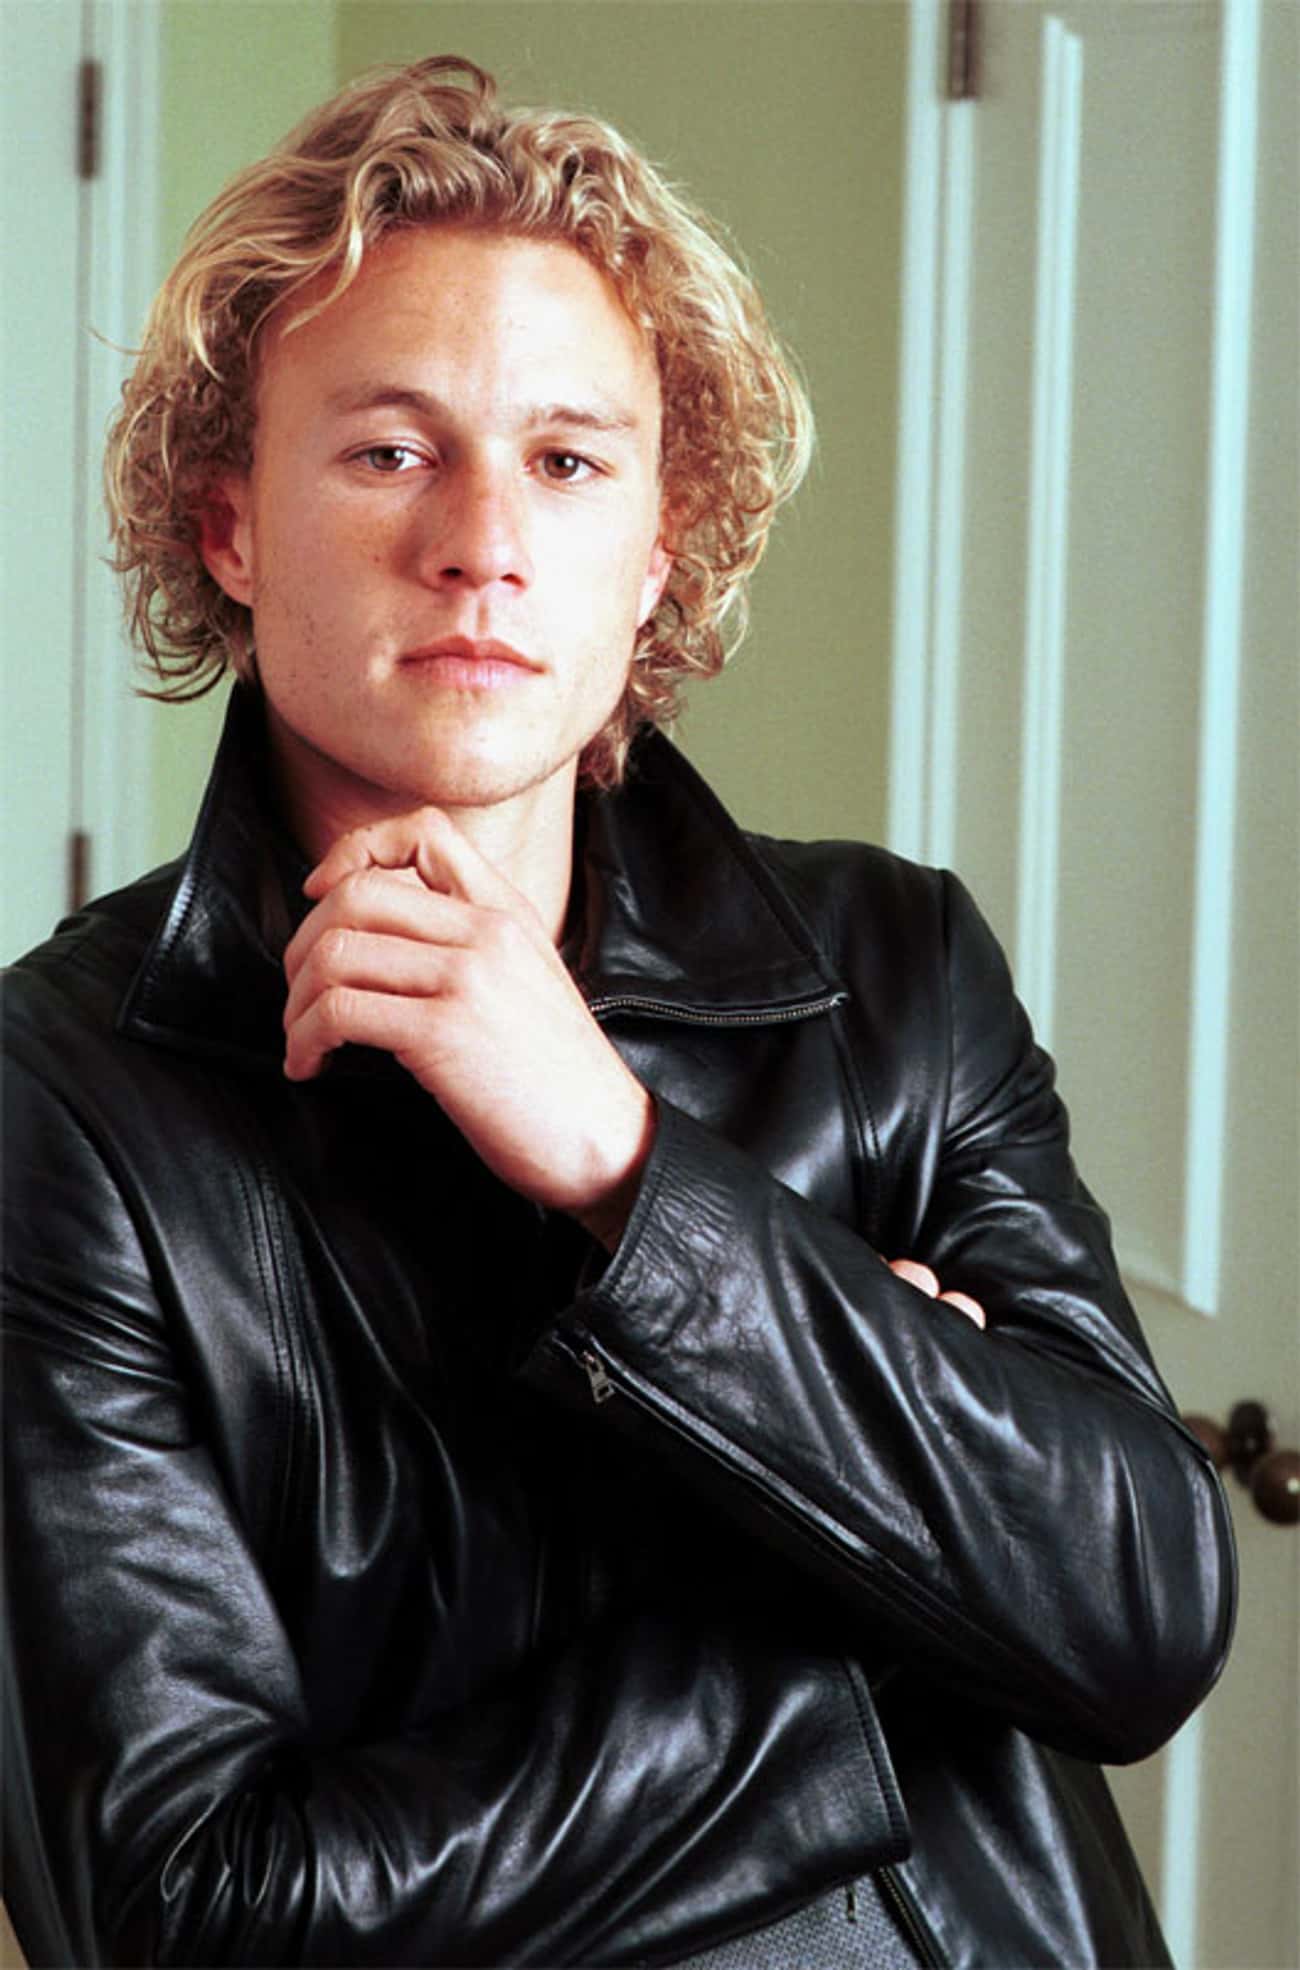 Young Heath Ledger in Black Leather Jacket Closeup Shot